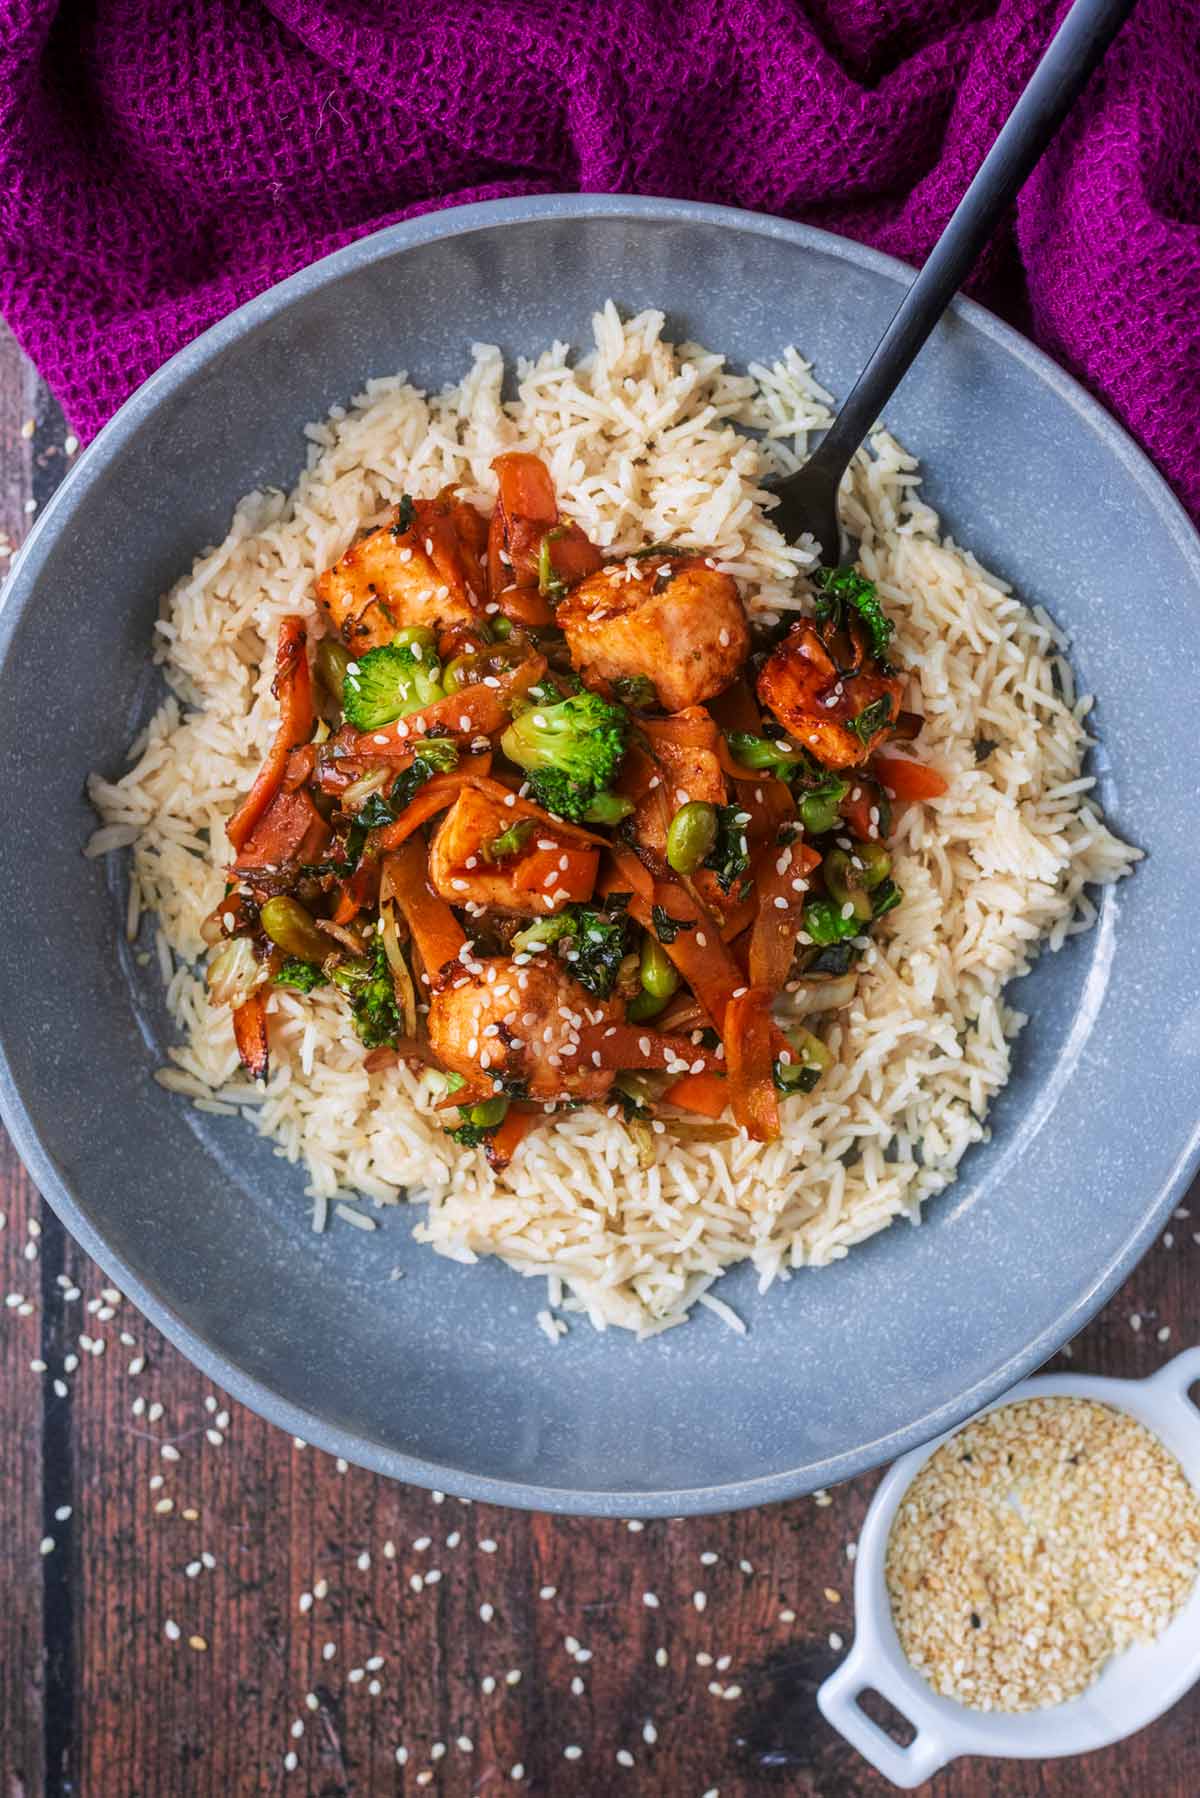 Salmon stir fry surrounded by cooked rice in a grey bowl.